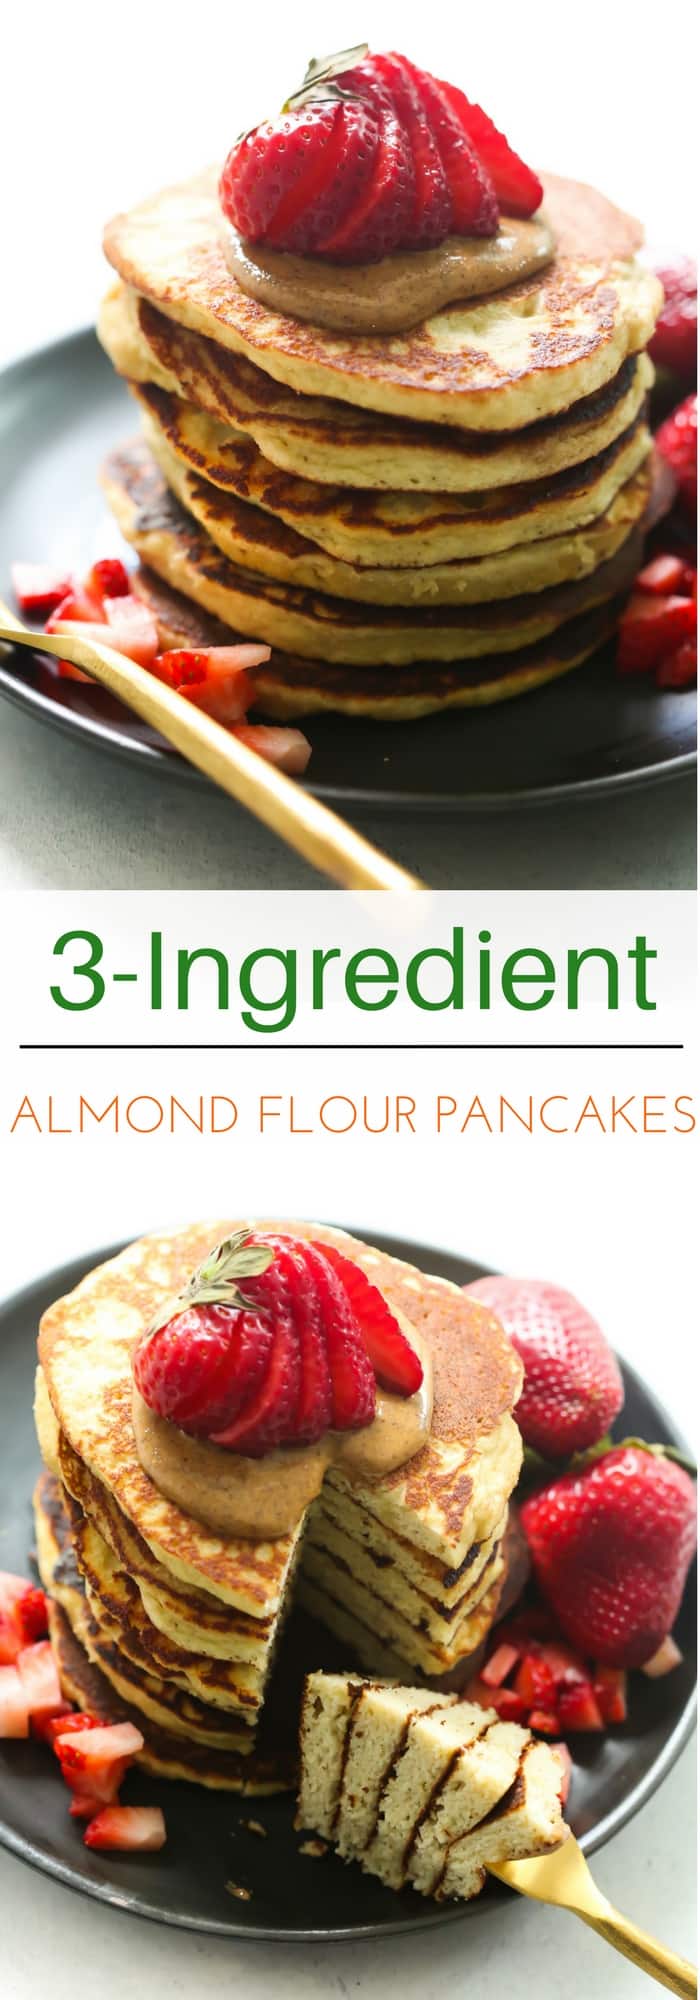 3-Ingredient Almond Flour Pancake recipe - This 3-ingredient Almond Flour Pancake recipe is made in a blender, packed with protein and it’s gluten/sugar-free!